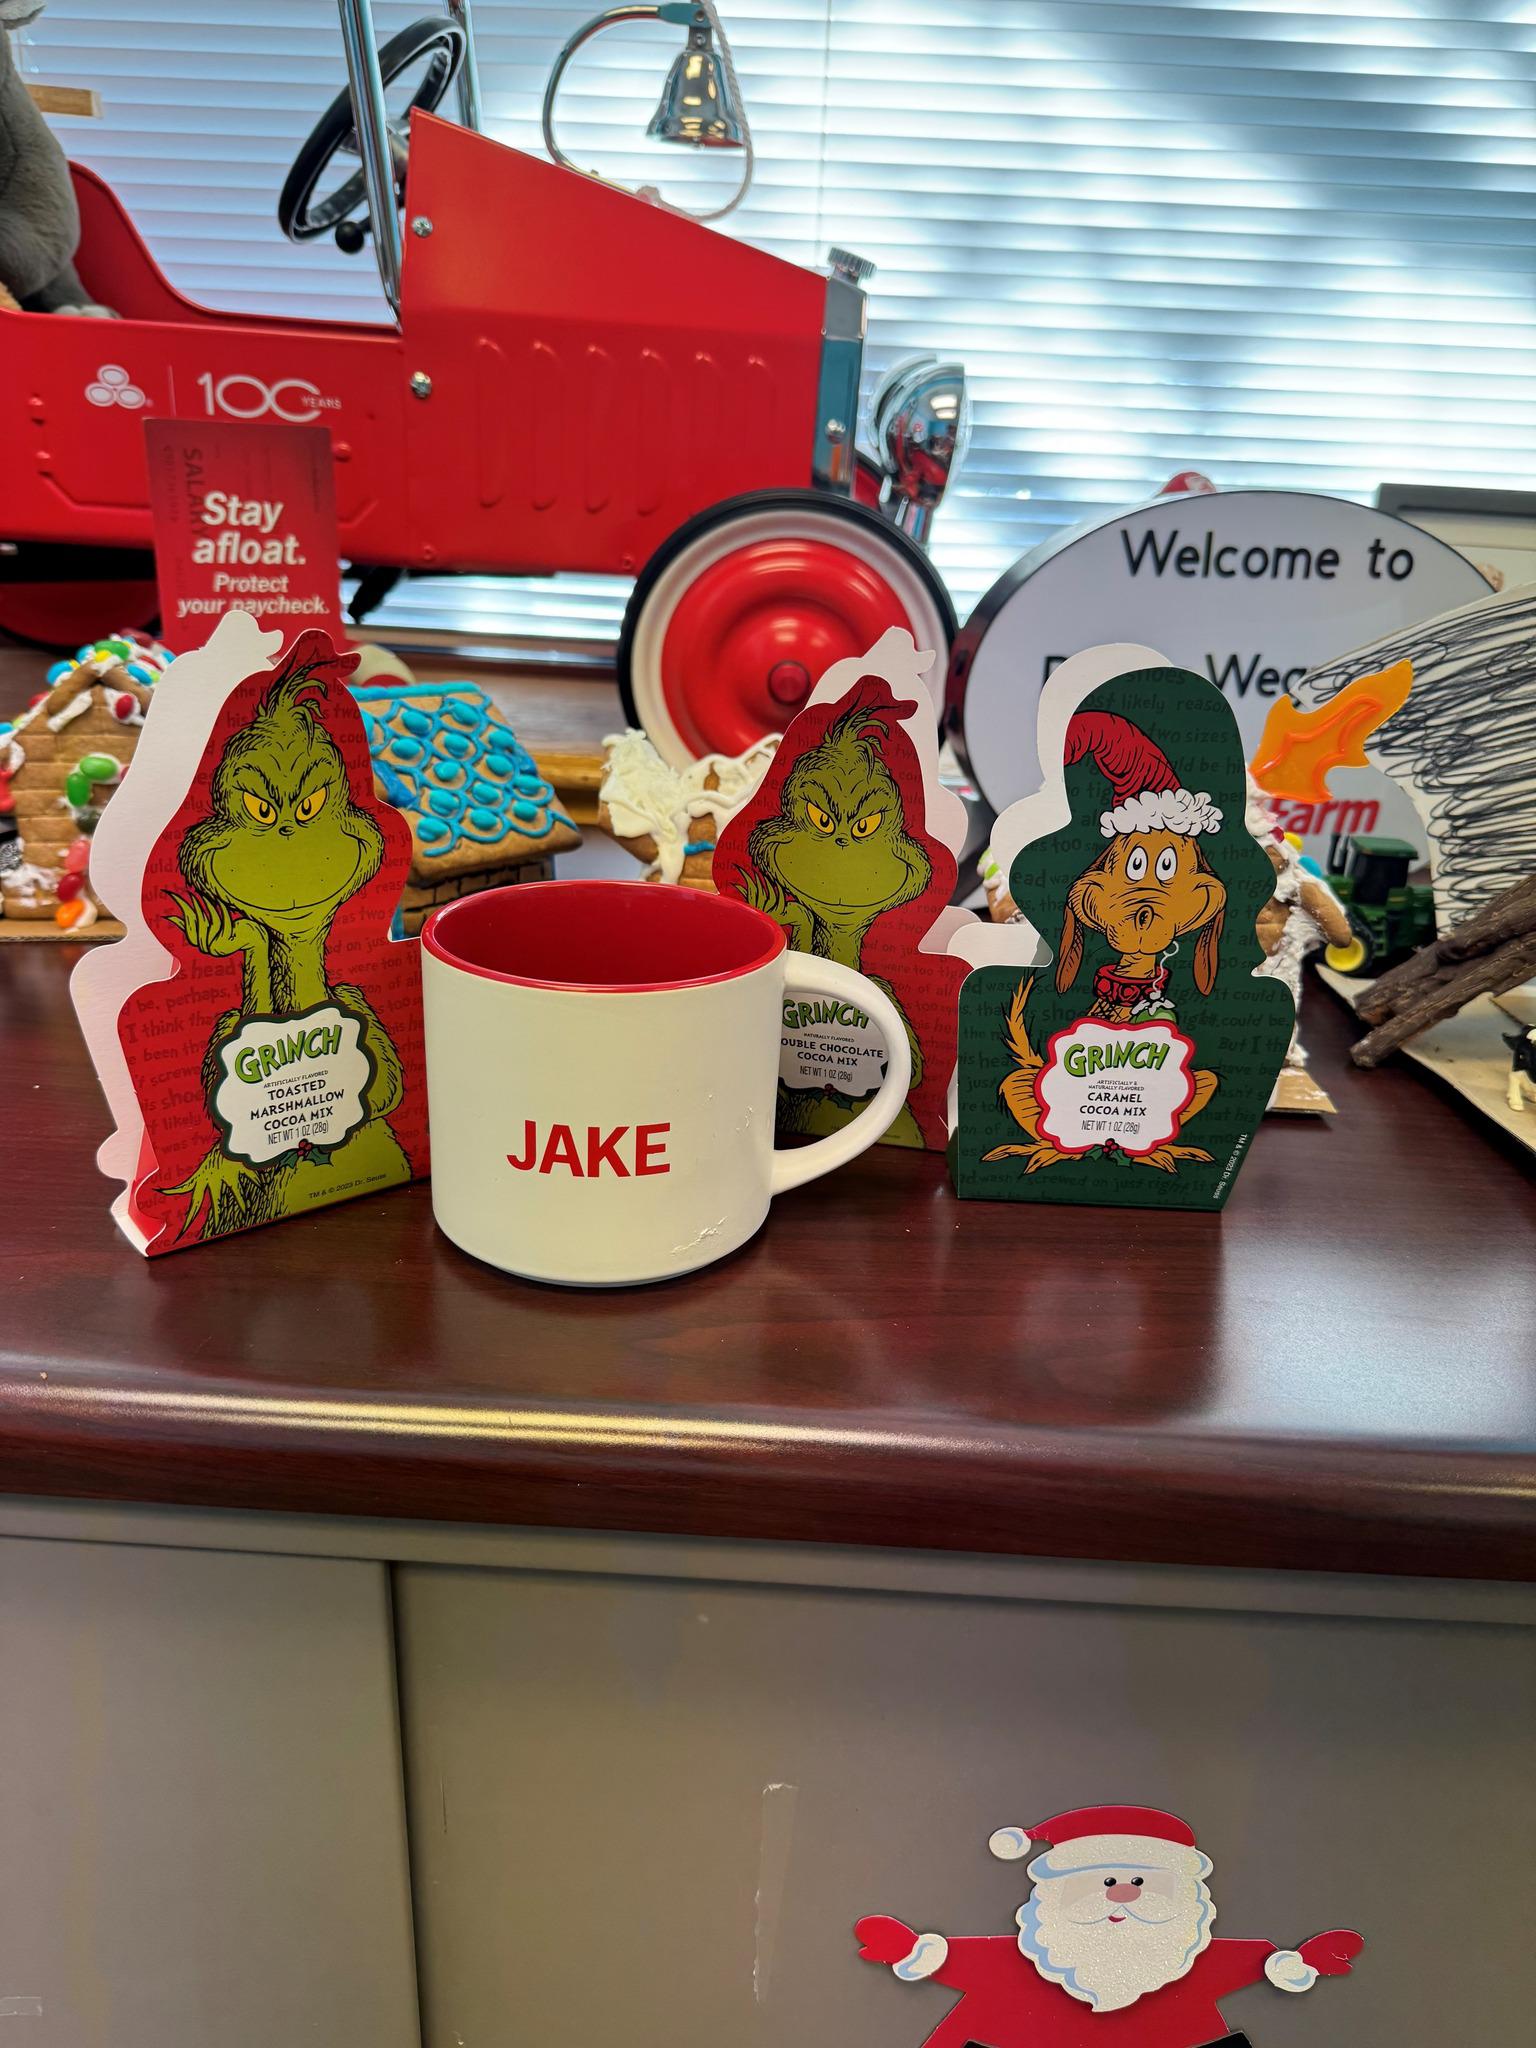 Sharing some Hot Cocoa with Jake today for National Hot Cocoa Day!
Enjoy a mug yourself today with your State Farm family!
Christmas is a time to reflect on the year, review your policies, and think about the gift of life insurance for loved ones